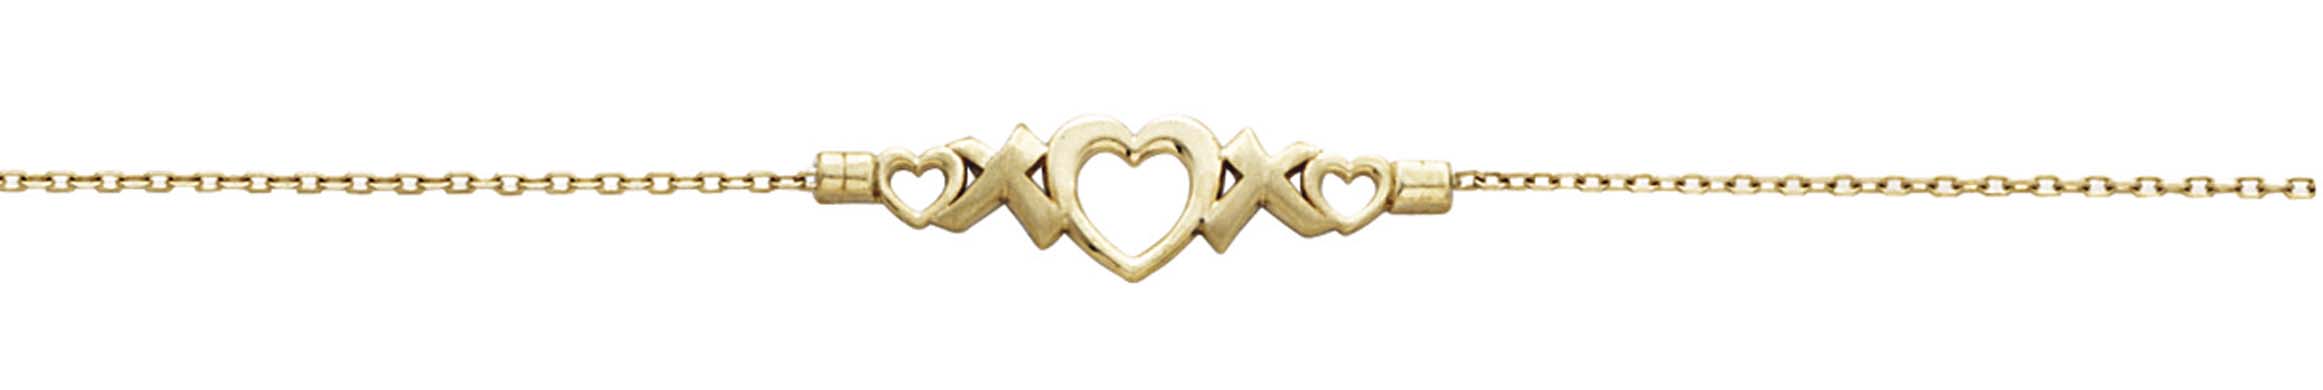 
14k Yellow Gold X and Heart 7.25 Inch Bracelet
